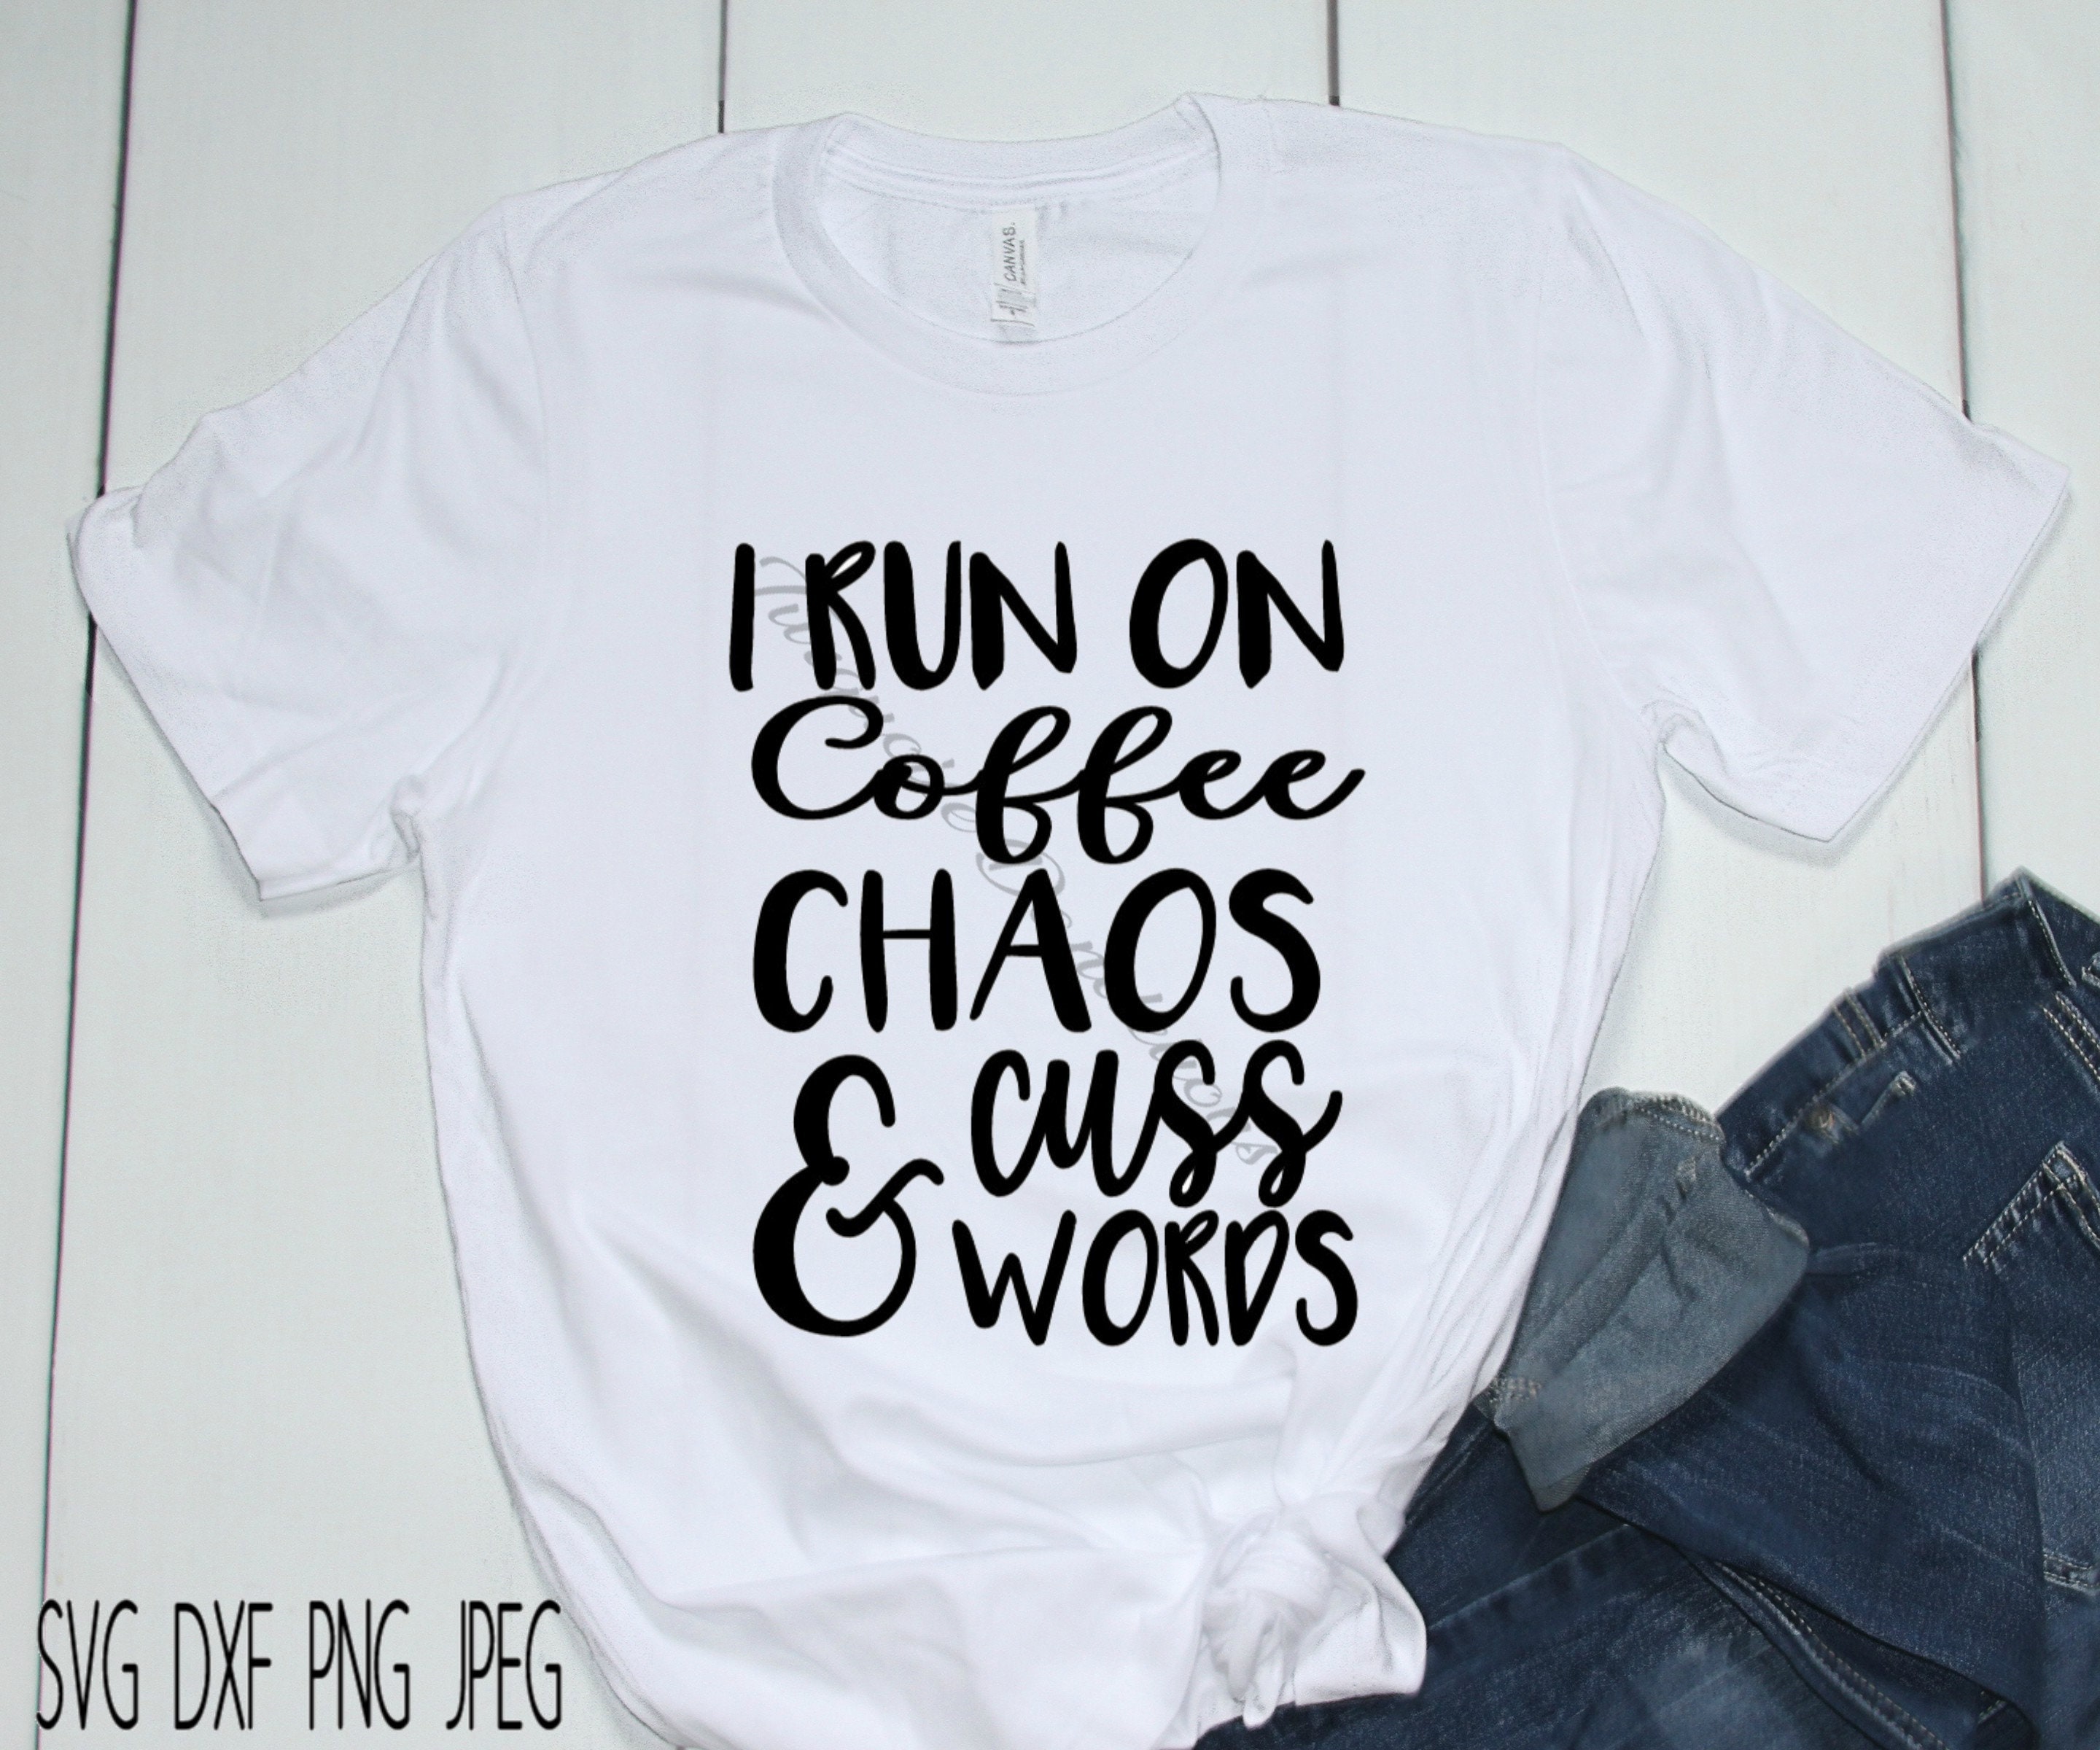 I Run on Coffee Chaos & Cuss Words SVG DXF Png Jpeg Cricut - Etsy Norway